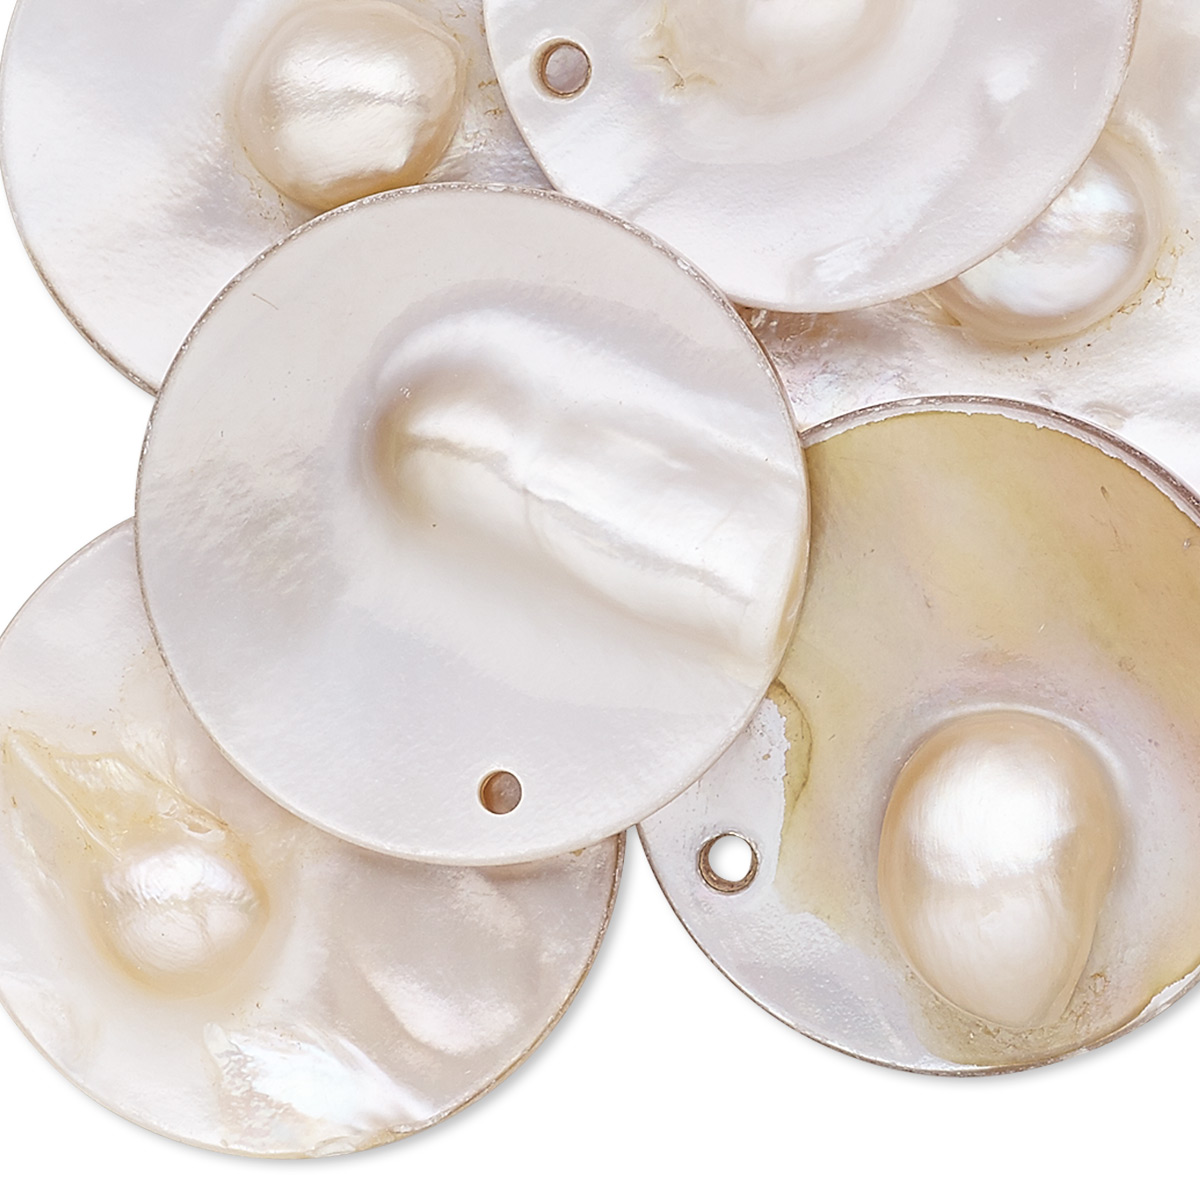 Drop, blister pearl shell (natural), 25mm single-sided puffed flat ...